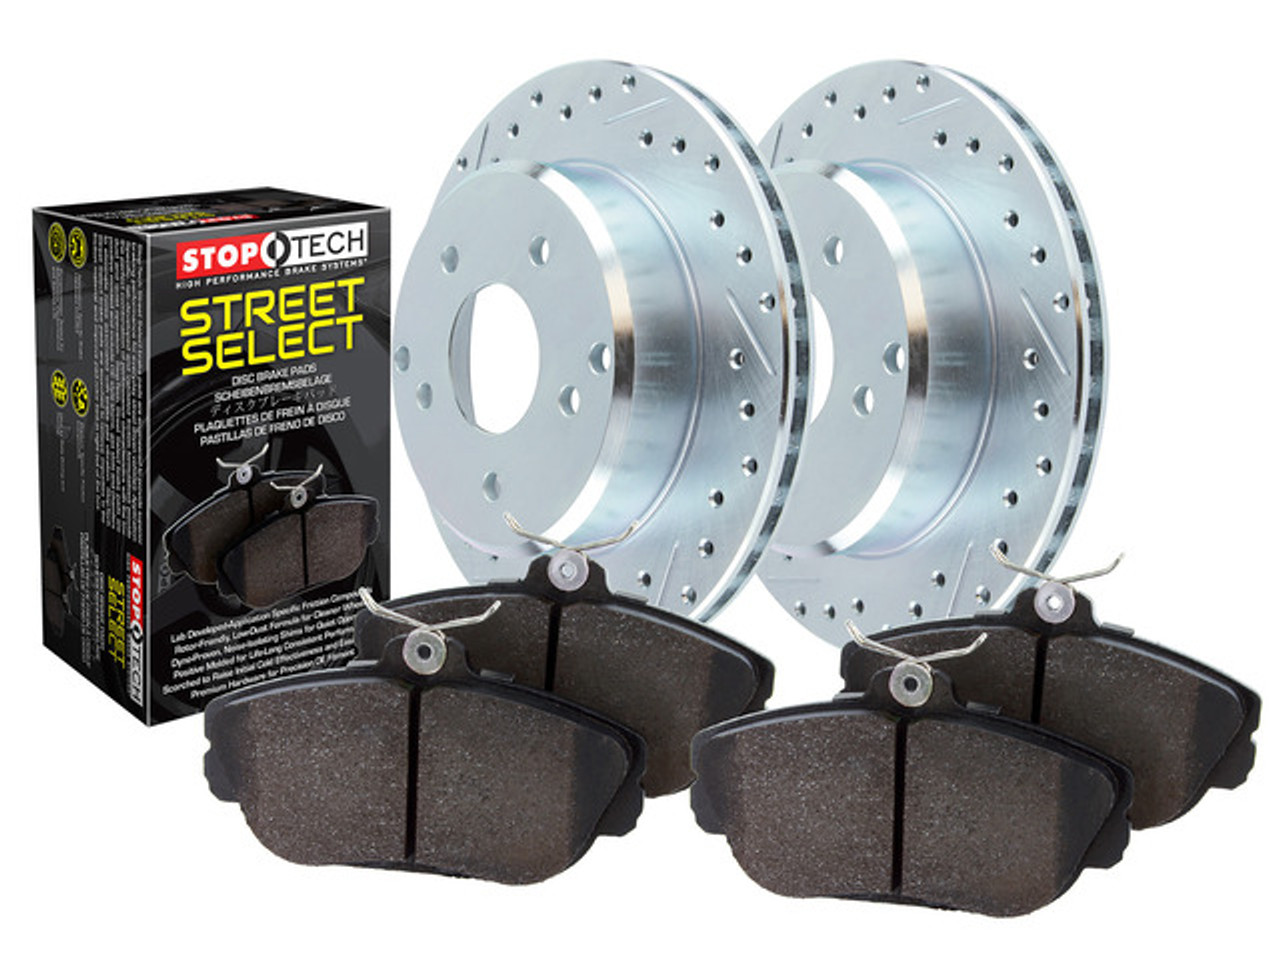 StopTech Select - 2 Wheel Brake Kit with Cross-Drilled & Slotted Rotors